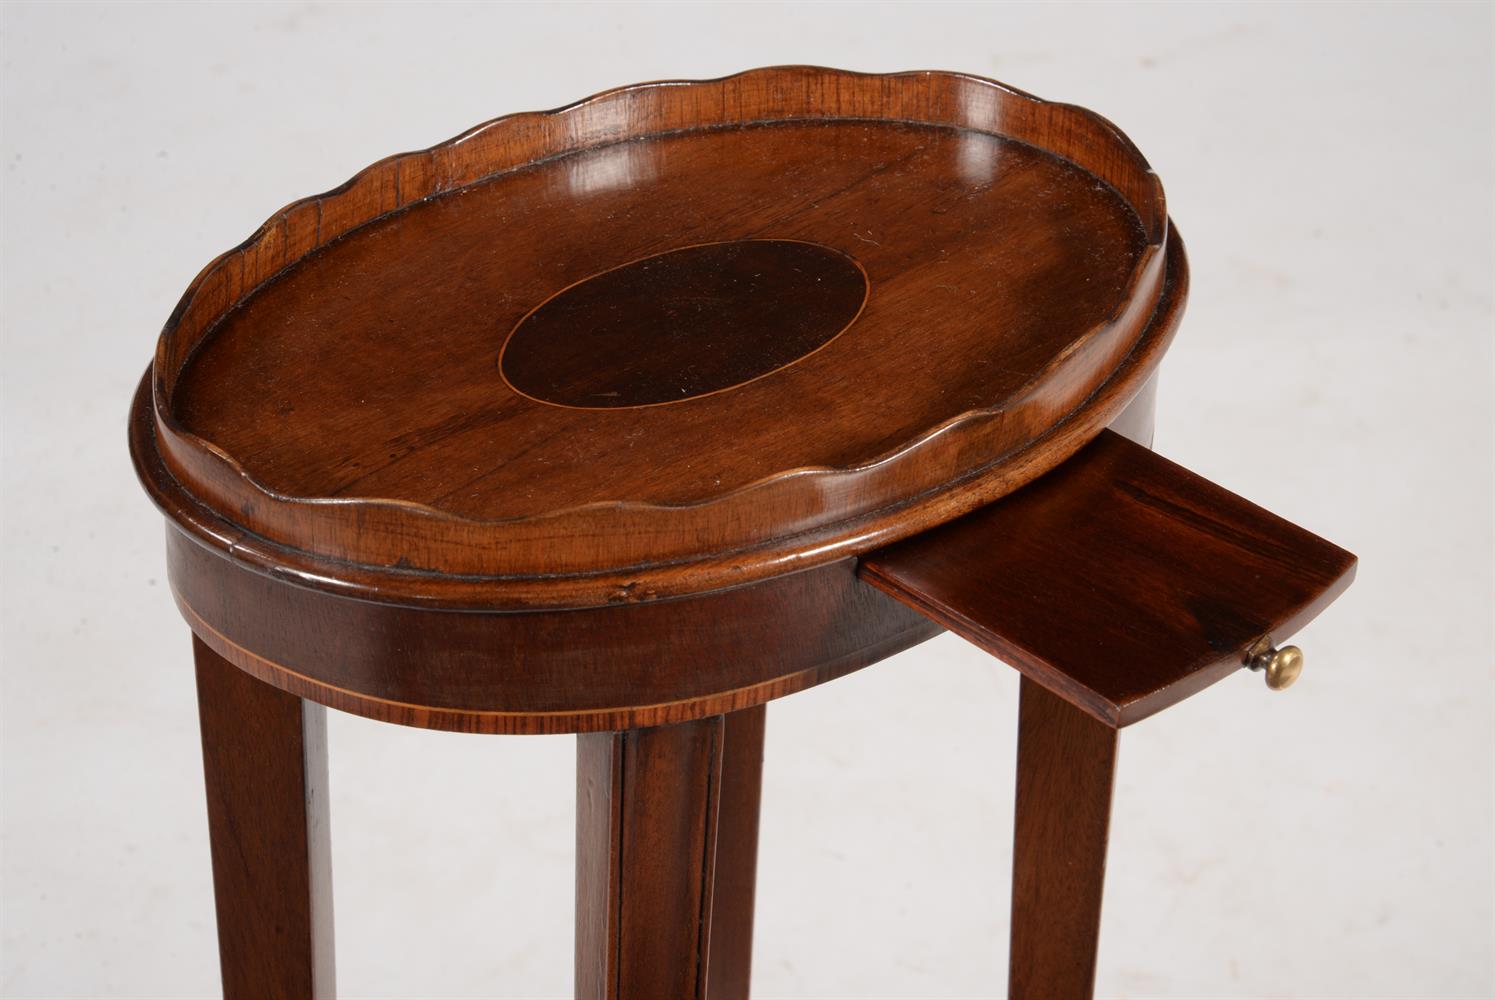 Y A George III mahogany and tulipwood banded oval urn stand - Image 3 of 3